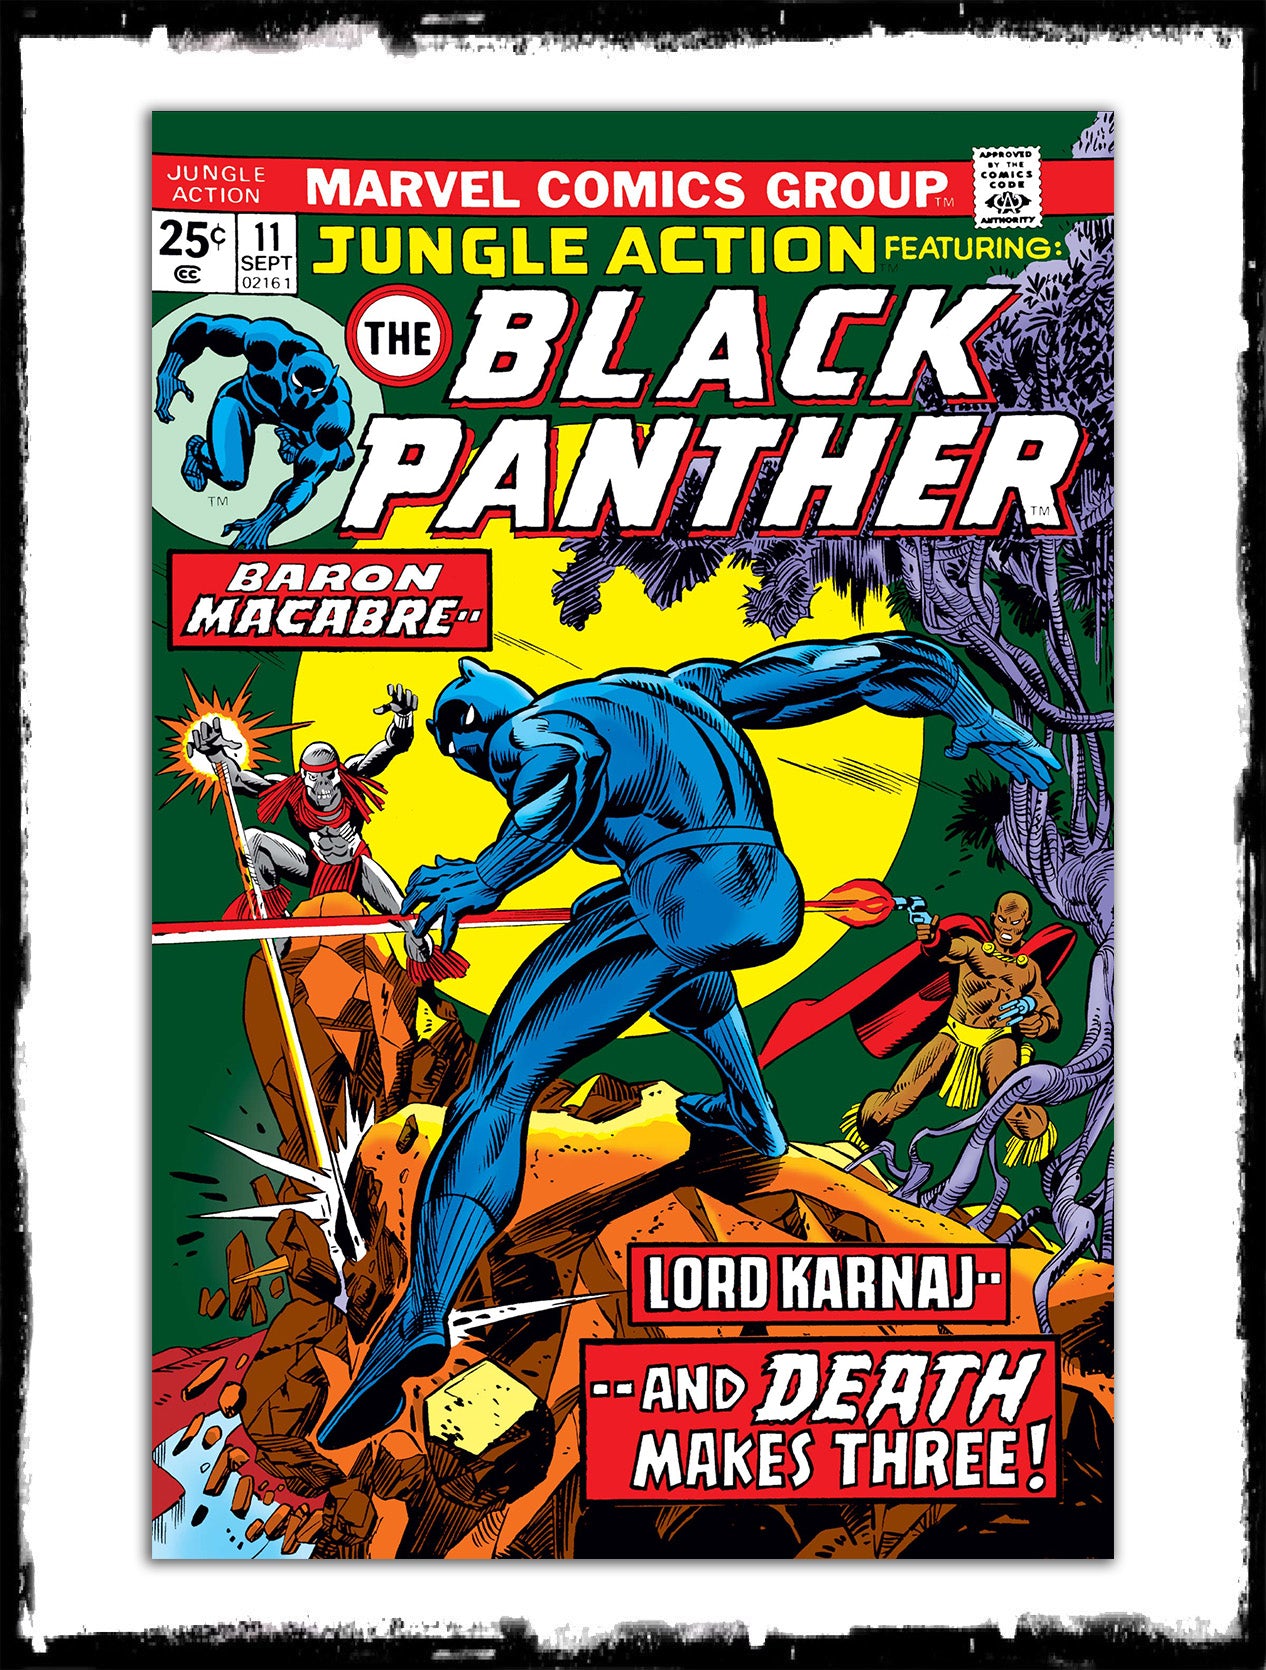 JUNGLE ACTION: FEAT BLACK PANTHER - #11 (1974 - VF+)